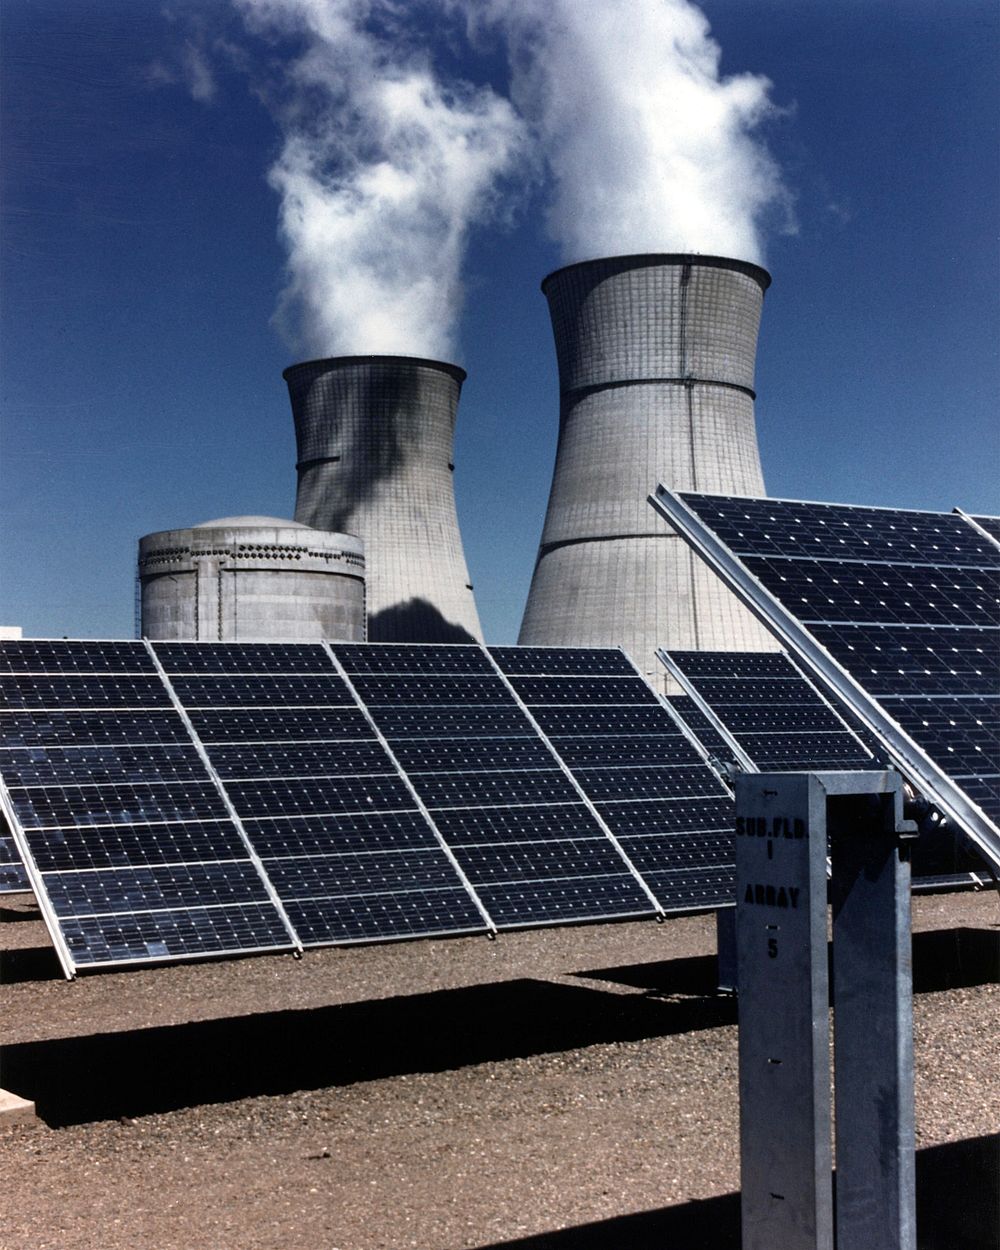 View of smudpv1 photovoltaic panels, with the twin cooling towers of the rancho seco nuclear plant in background.